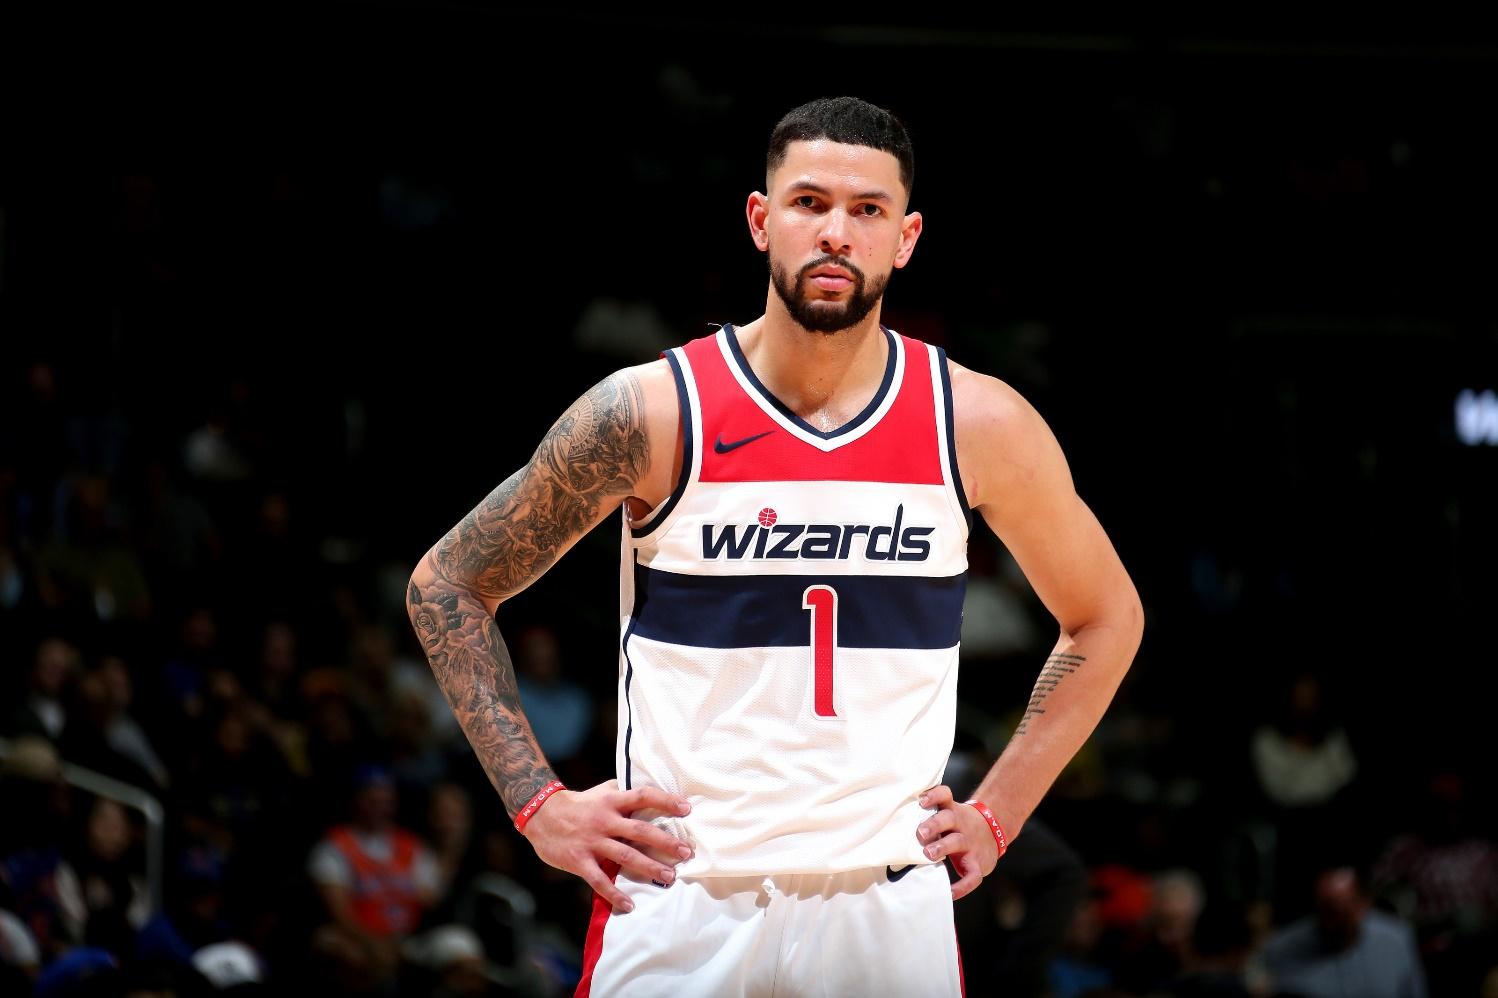 Washington Wizards: Austin Rivers has been a disappointment this season